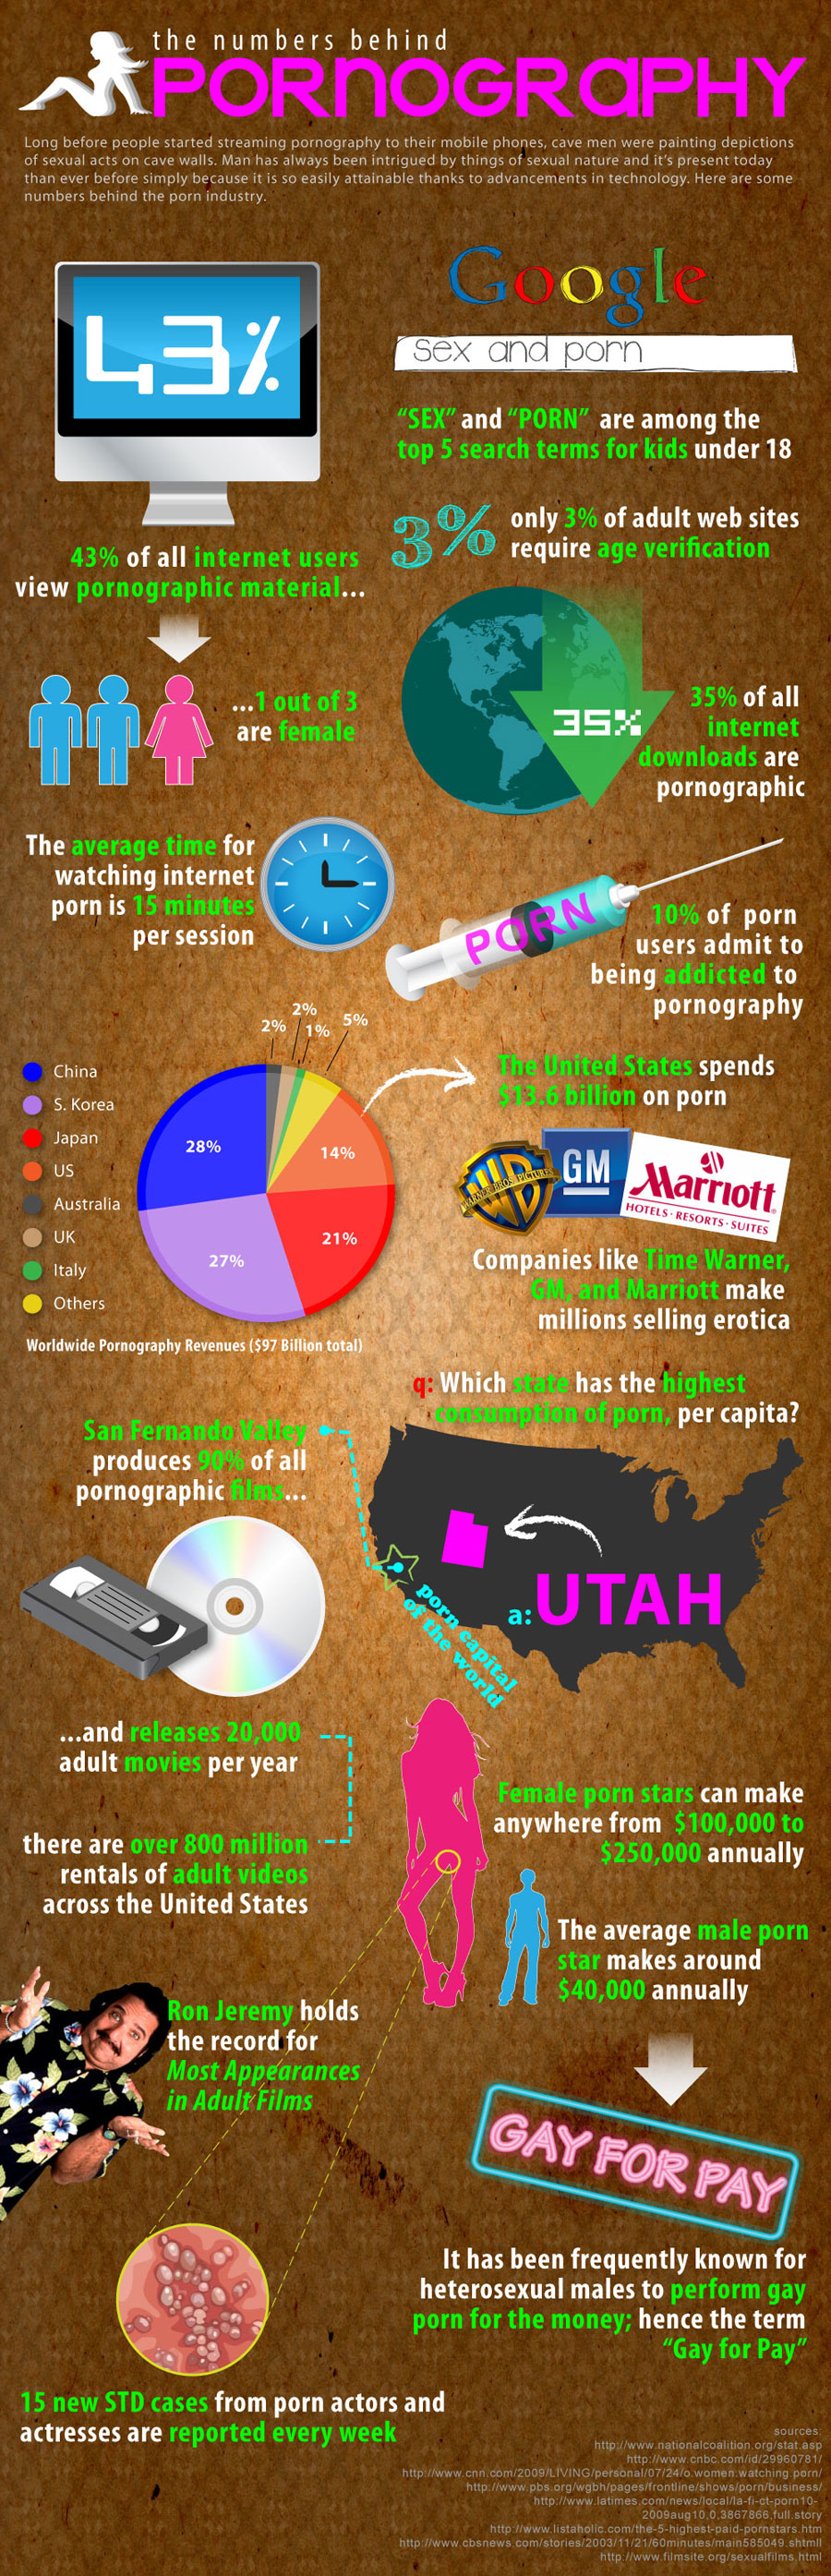 Porn Stats - Internet and Pornography - Stats [INFOGRAPHIC]